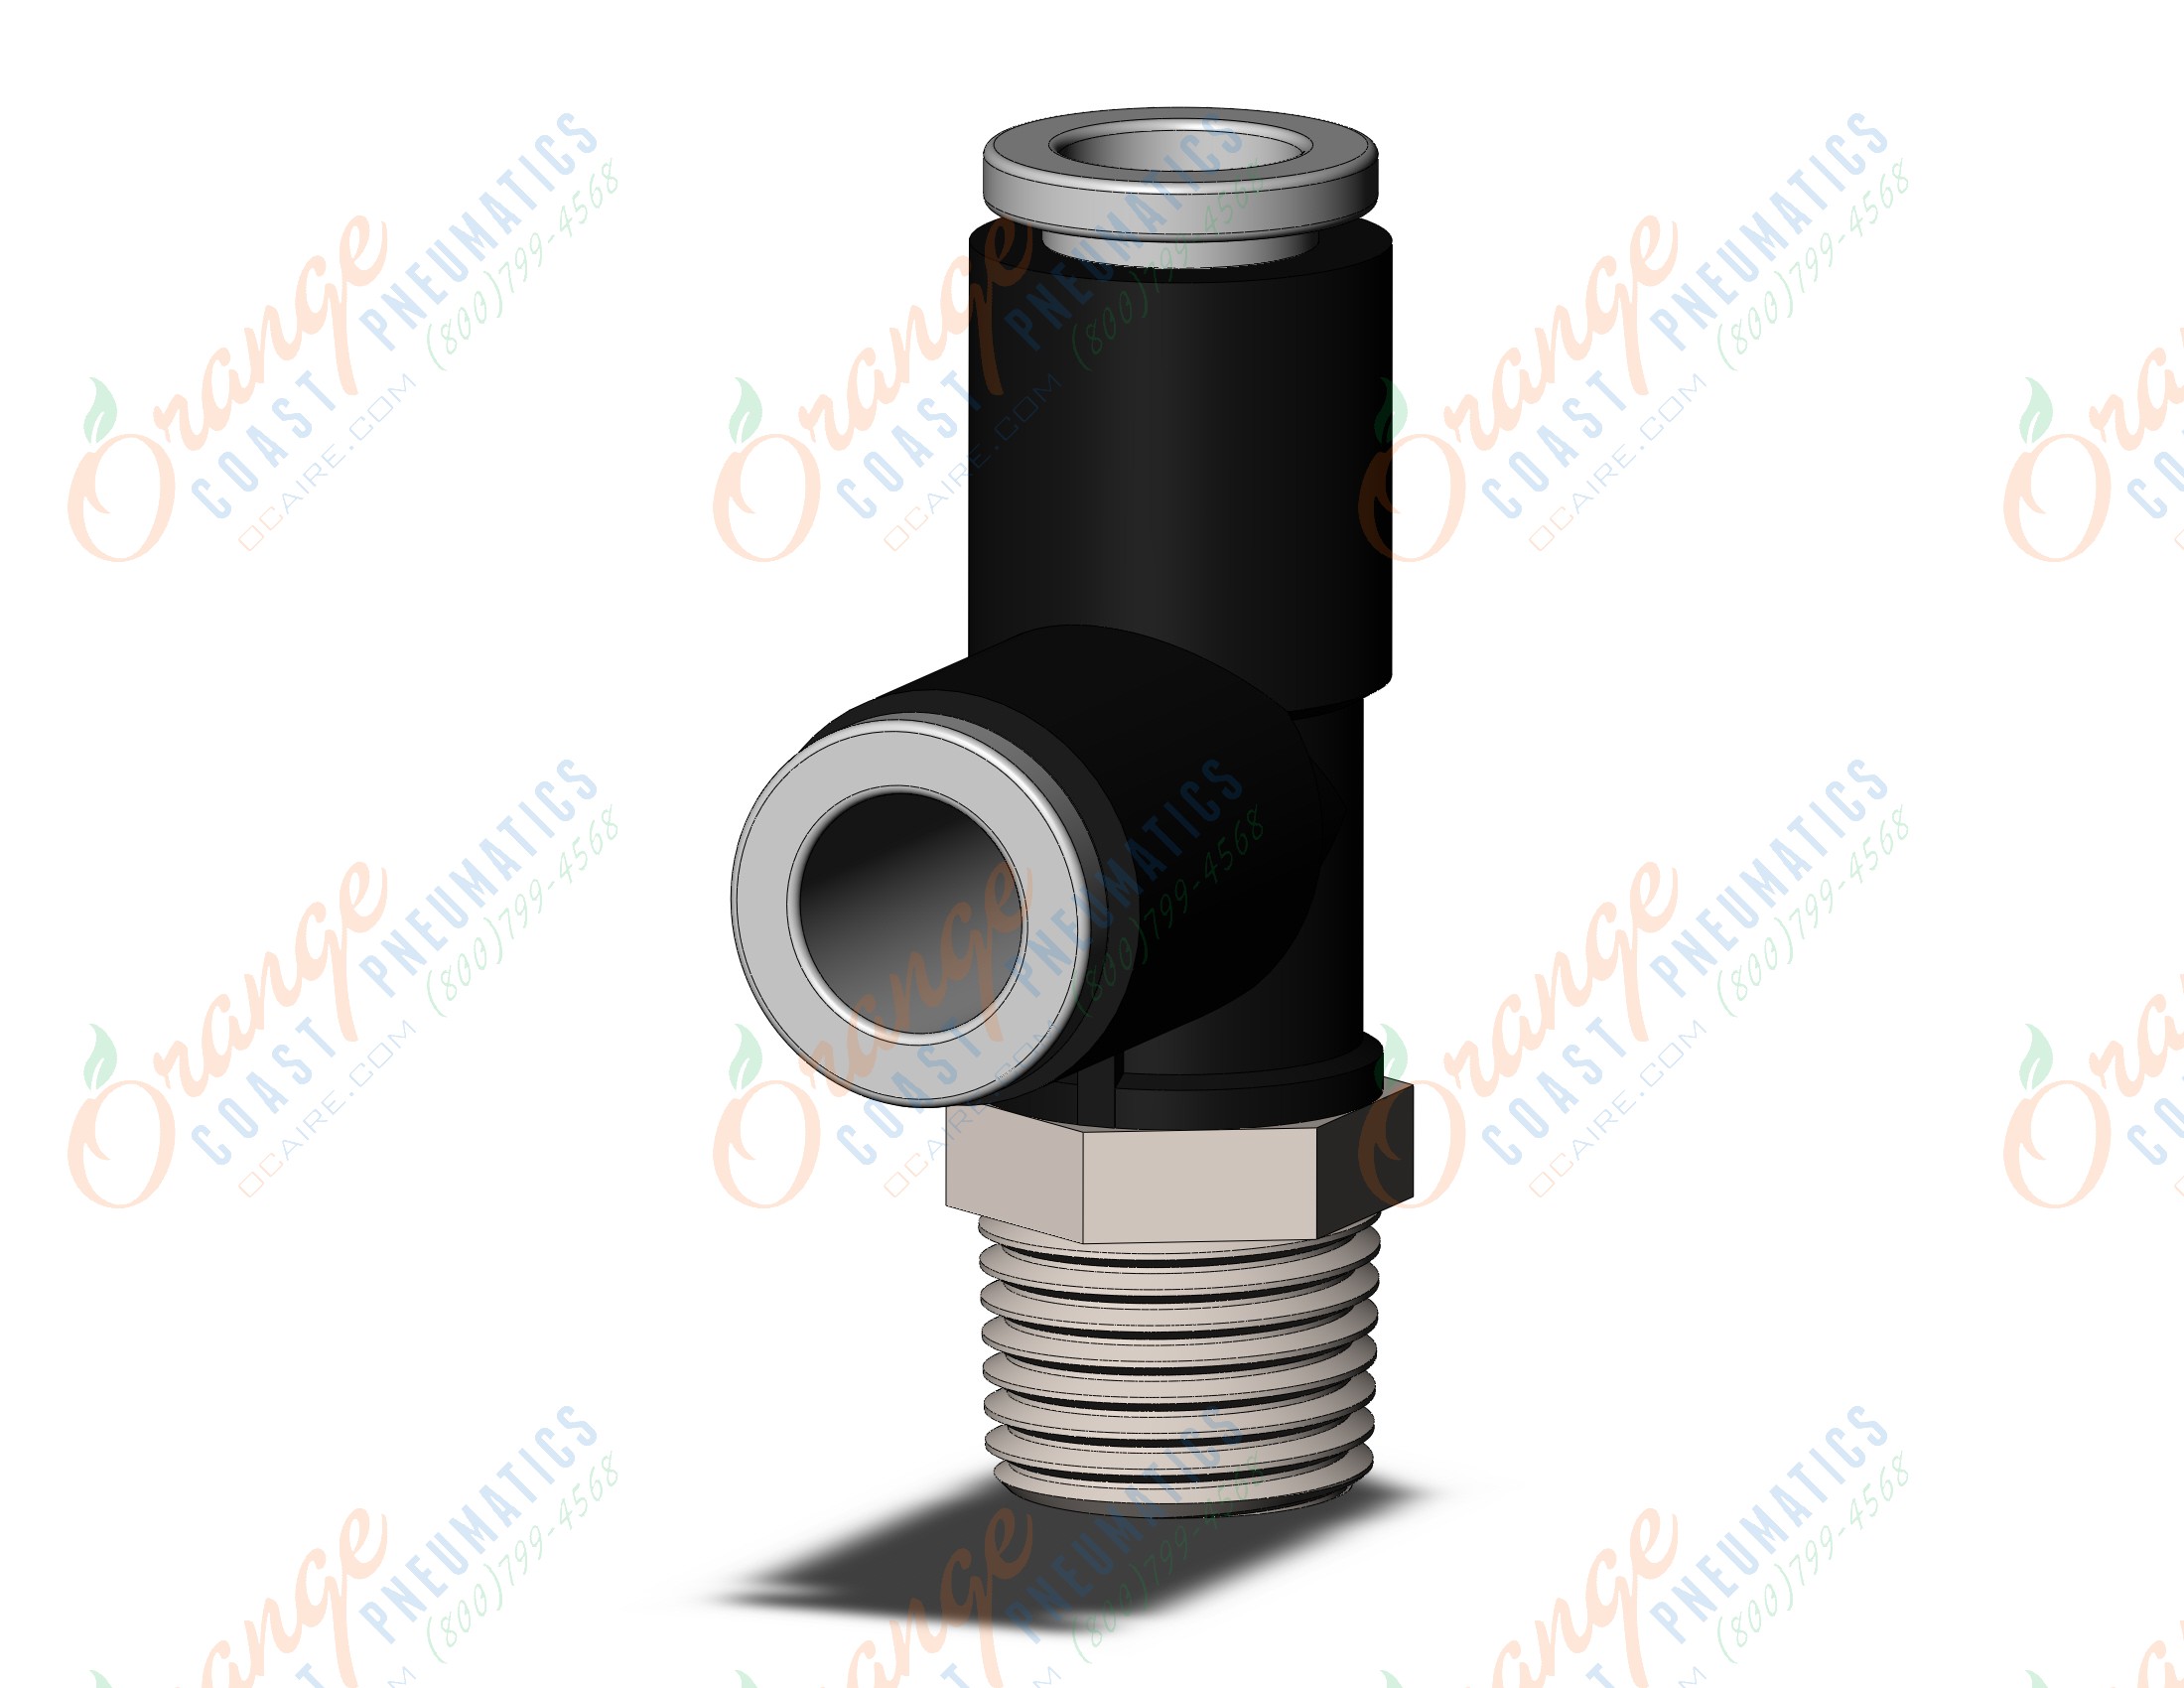 SMC KQ2Y06-01NS-X35 kq2 6mm, KQ2 FITTING (sold in packages of 10; price is per piece)